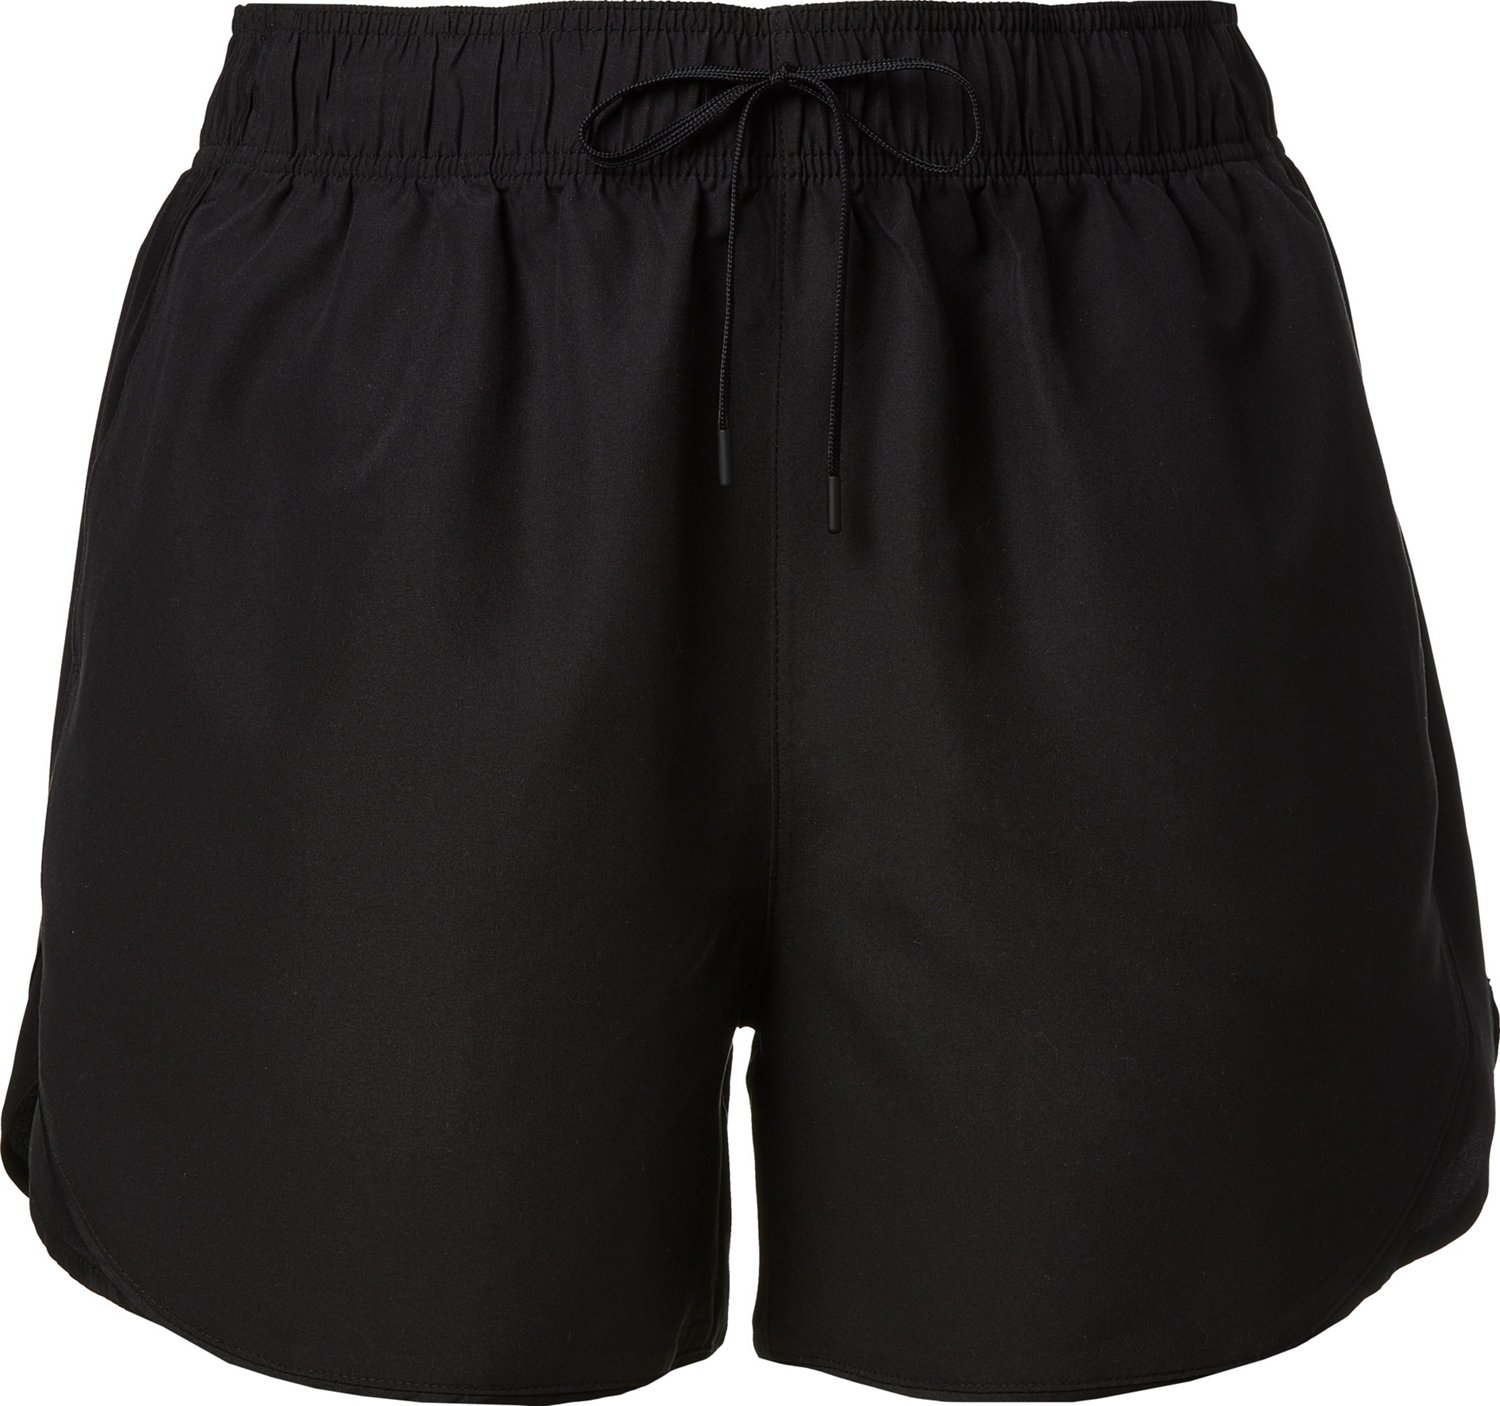 BCG Womens Woven Donna Plus Size Shorts